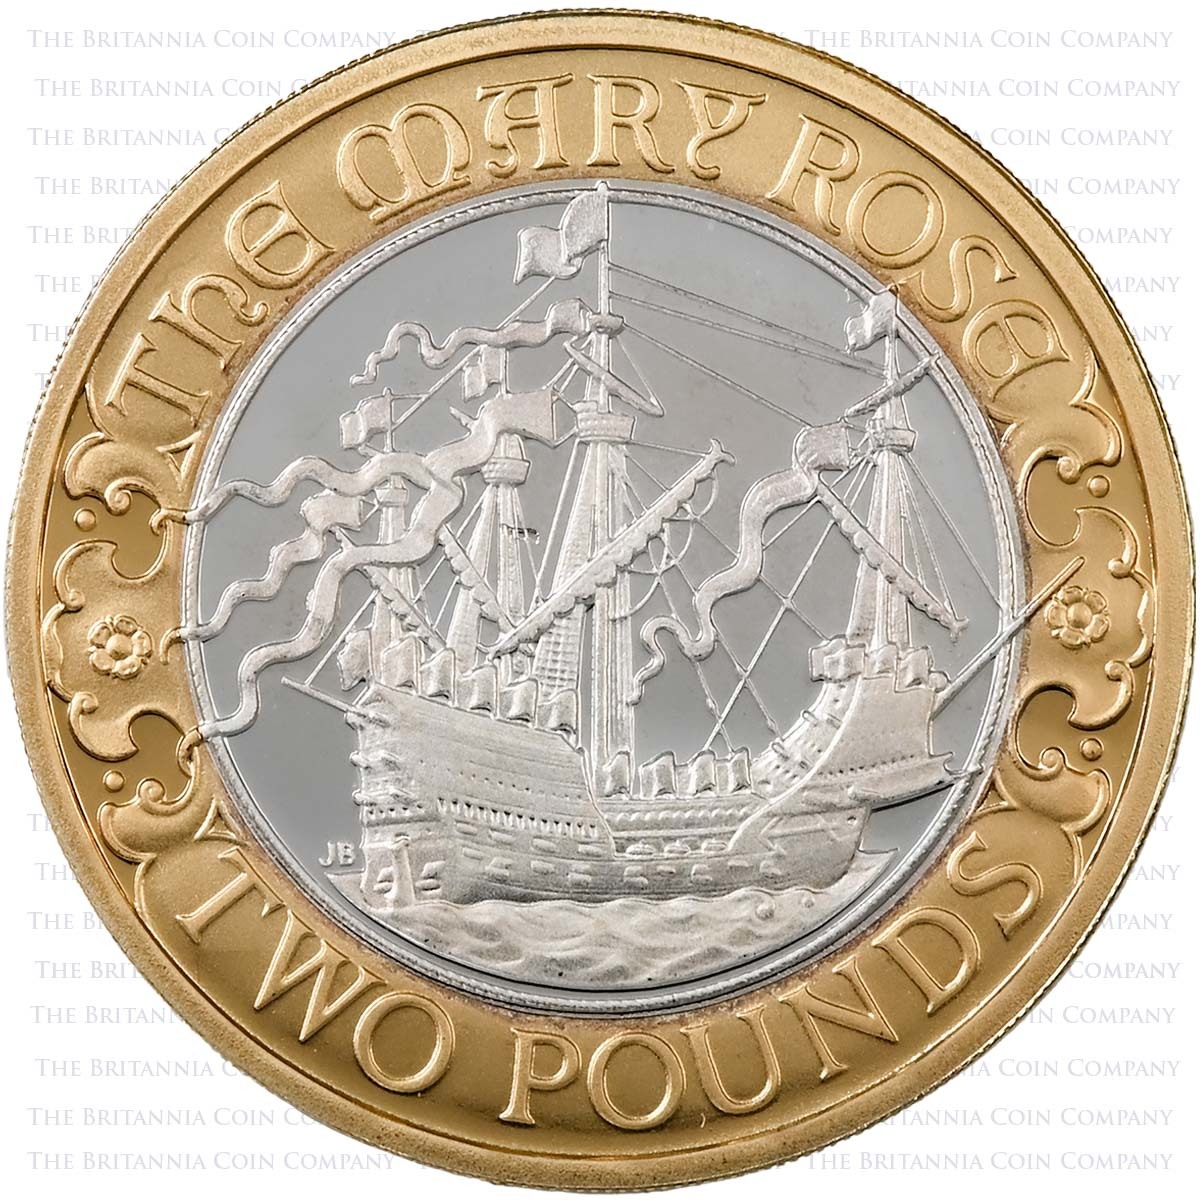 UKMRSP 2011 Mary Rose £2 Silver Proof Reverse